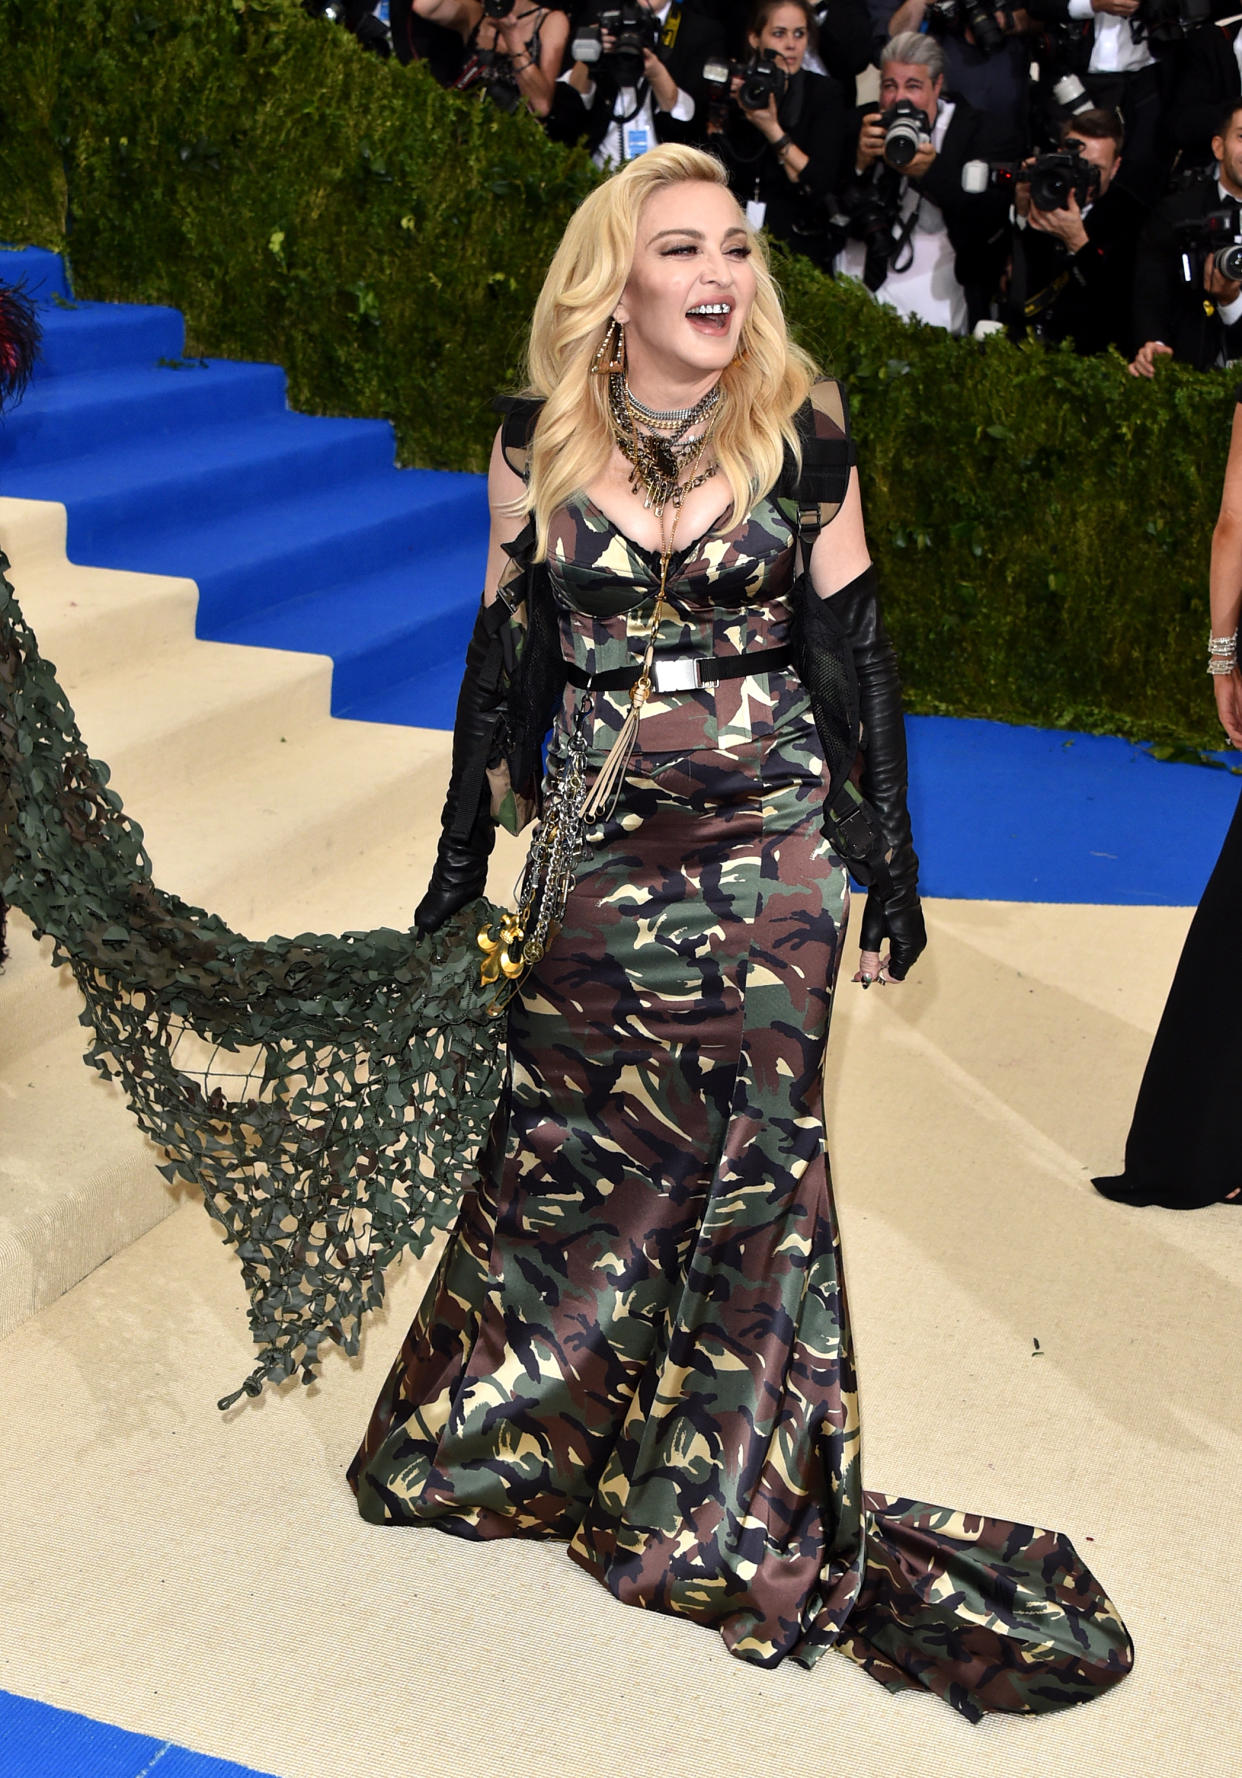 Madonna shows off bruise while wearing Versace (Photo by John Shearer/Getty Images)